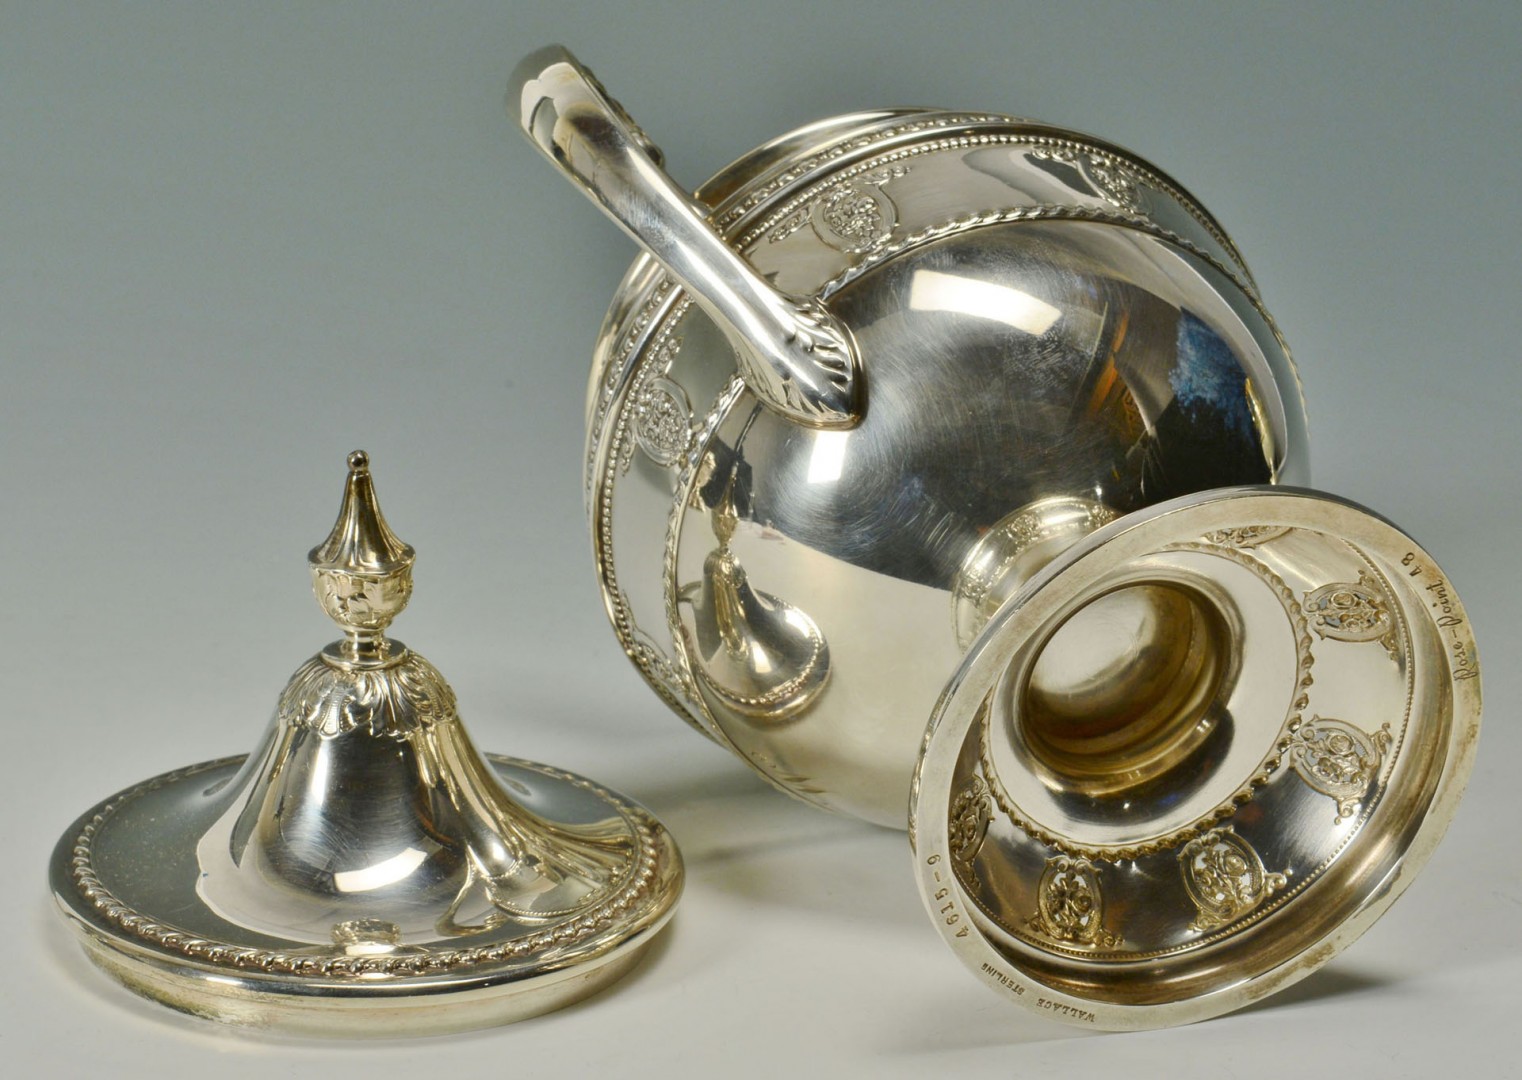 Lot 102: Wallace "Rose Point" Sterling Coffee, Tea Service